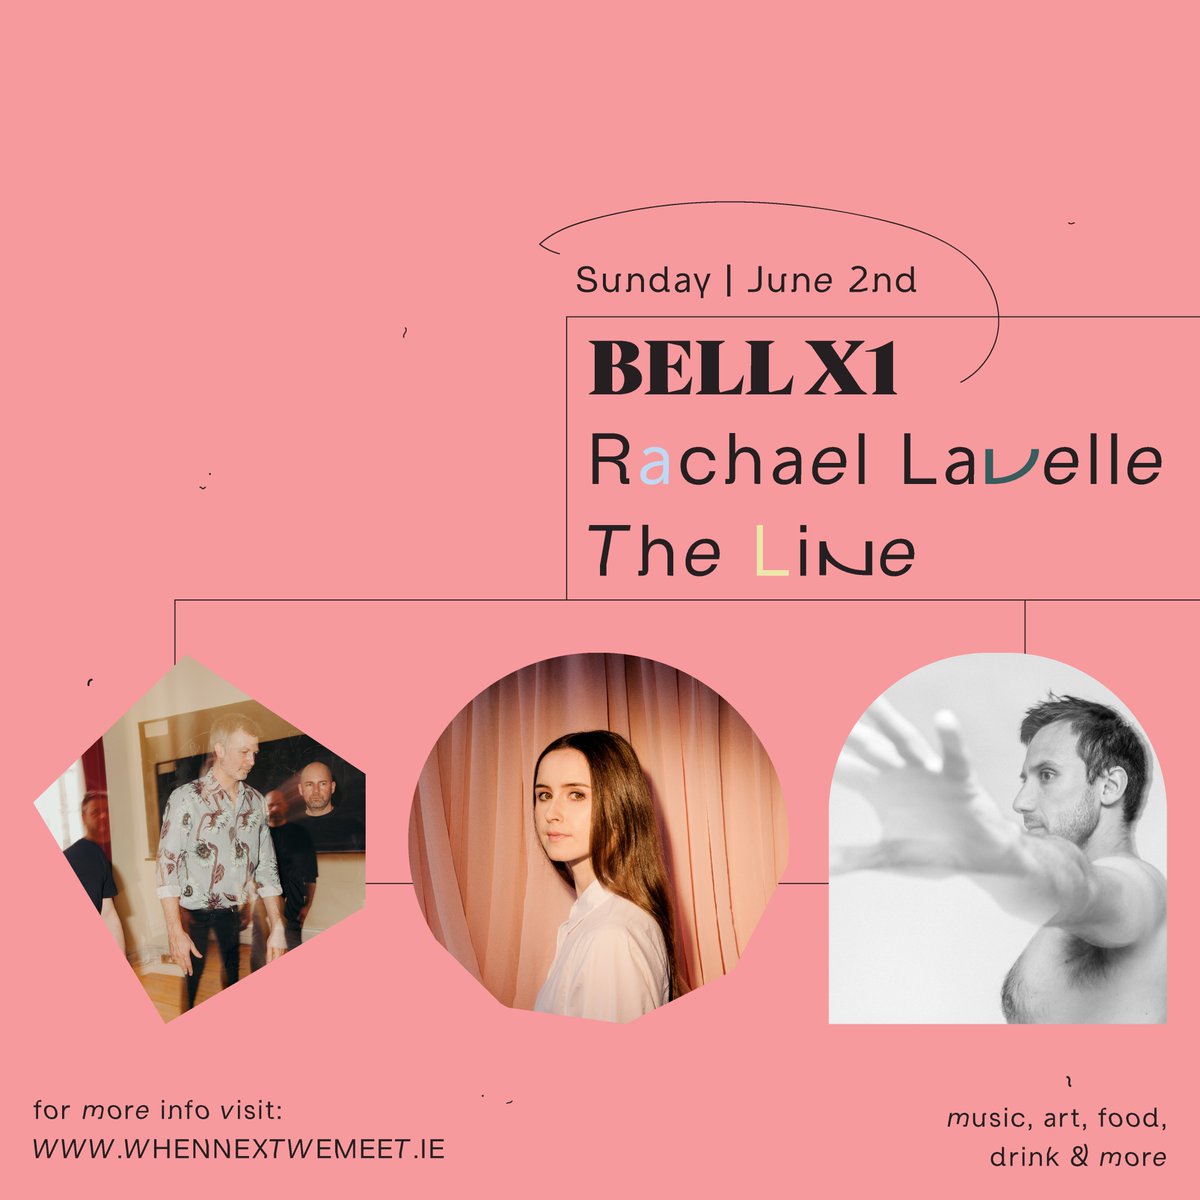 Performing live at Raheen House on Sunday June 2nd is sound artist, musician & @meltybrains member Brian Dillon #TheLine 💫 🪩 Also playing are BellX1, Rachael Lavelle and a host of other artists, bands and DJs. 🎟️ whennextwemeet.ie 📅 June 1st & 2nd at @HotelRaheen